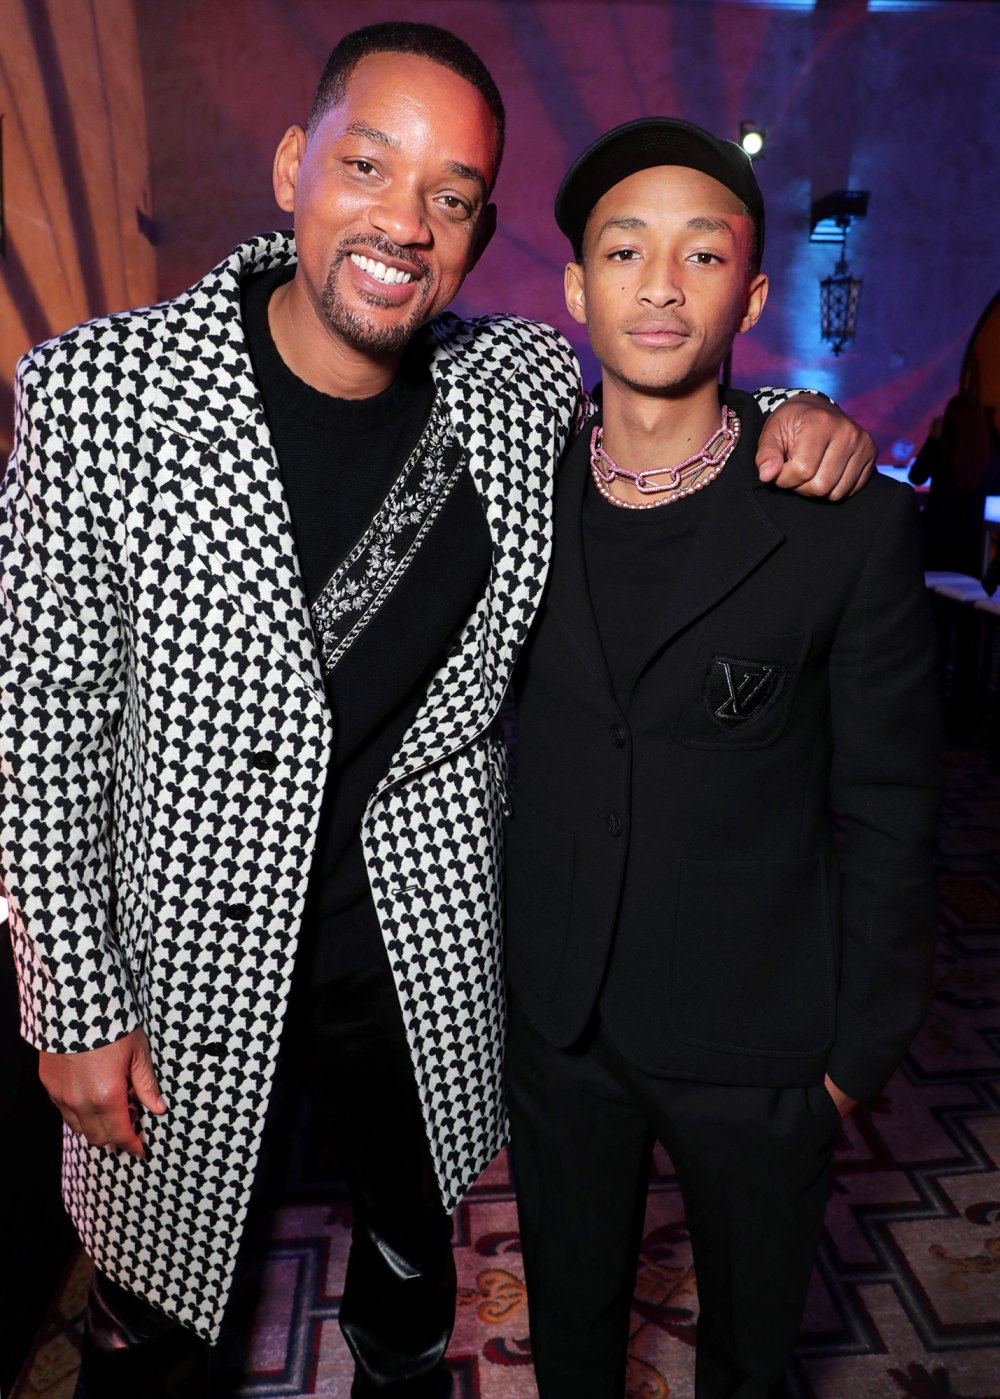 Will Smith Teases Son Jaden About Having Kids in 25th Birthday Tribute: 'What You Doin Over There?'